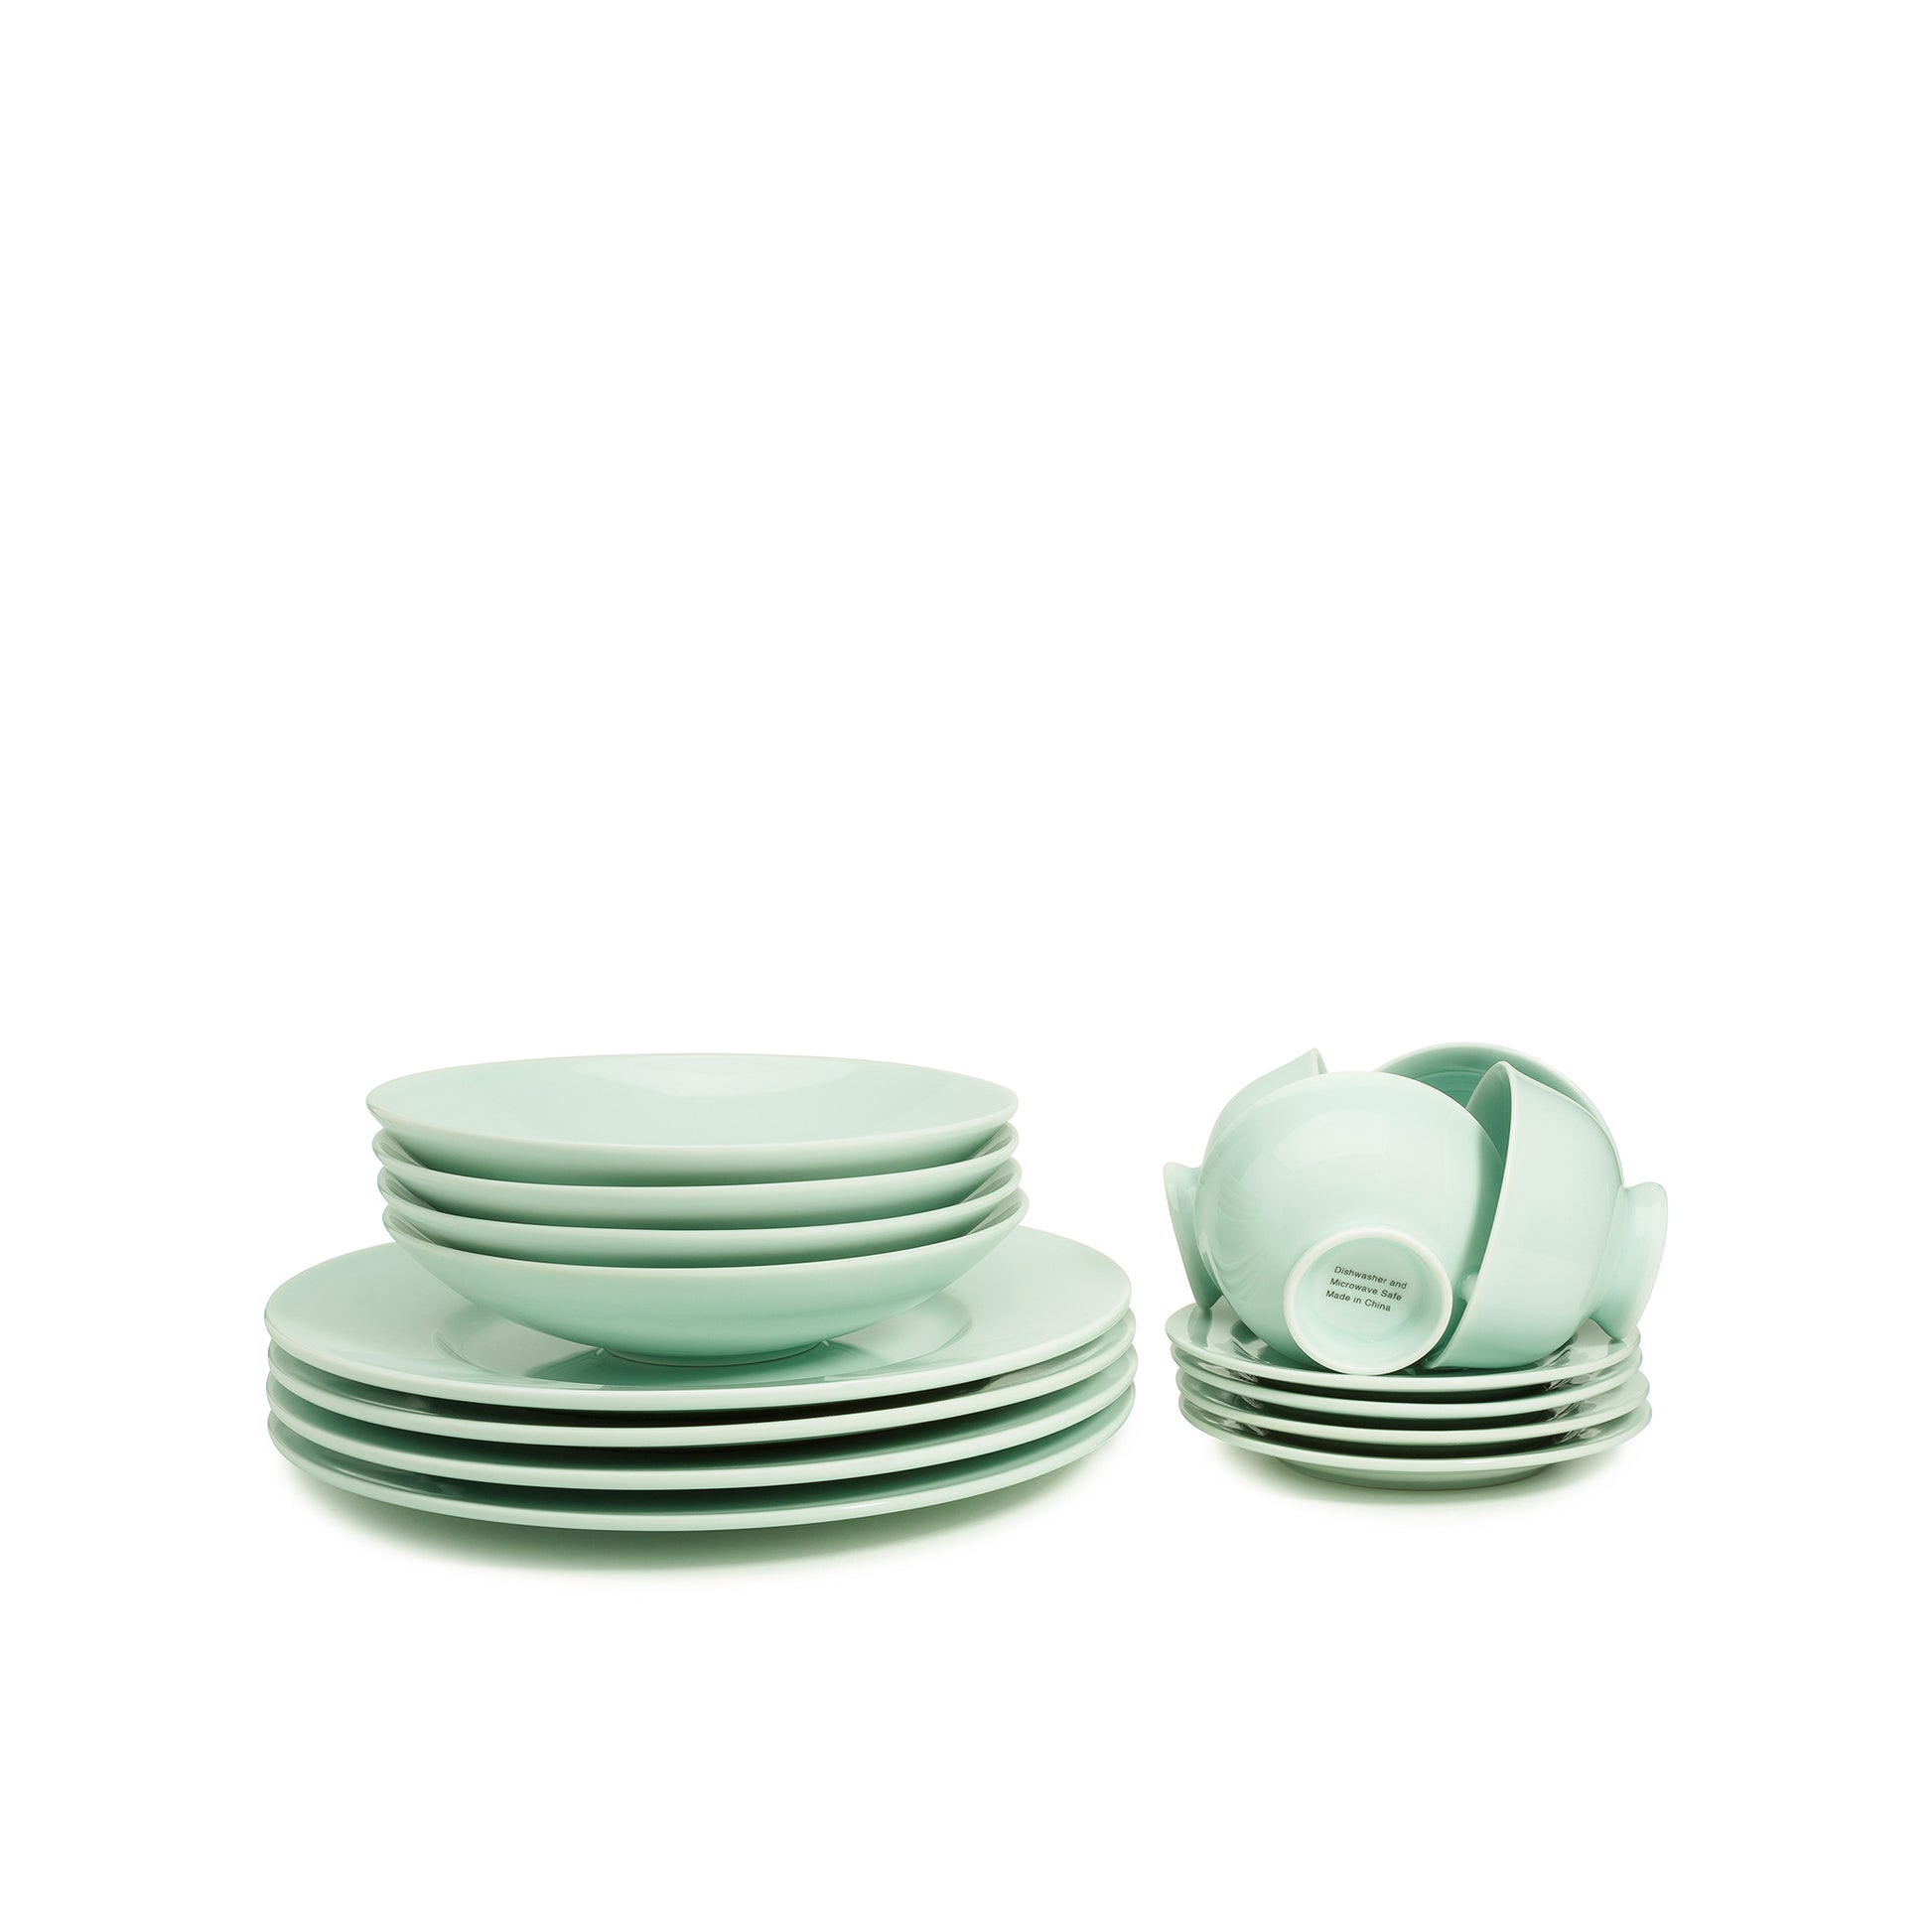 16 piece green celadon porcelain dinnerware set, dinner plates, 8" salad bowls, coffee cups and saucers, media 3 of 5